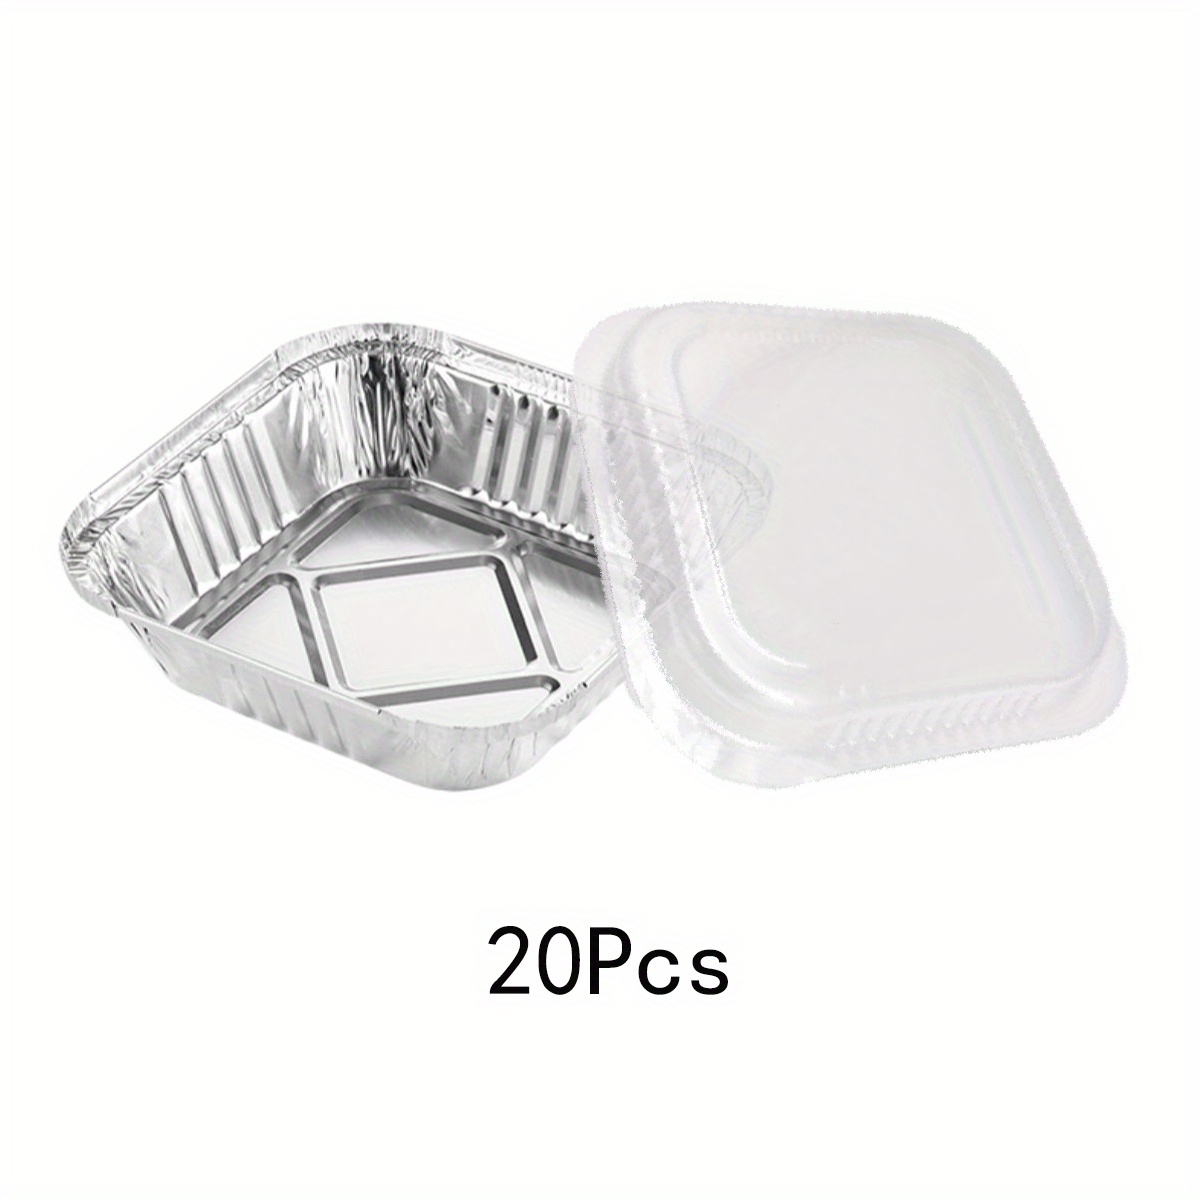 WANBAO 30 Pcs Disposable Aluminum Tin Foil Baking Pans Bakeware Square 8''  X 8'' X 2'' Inch Meal Prep for Catering, Baking Cakes, Breads, Brownies